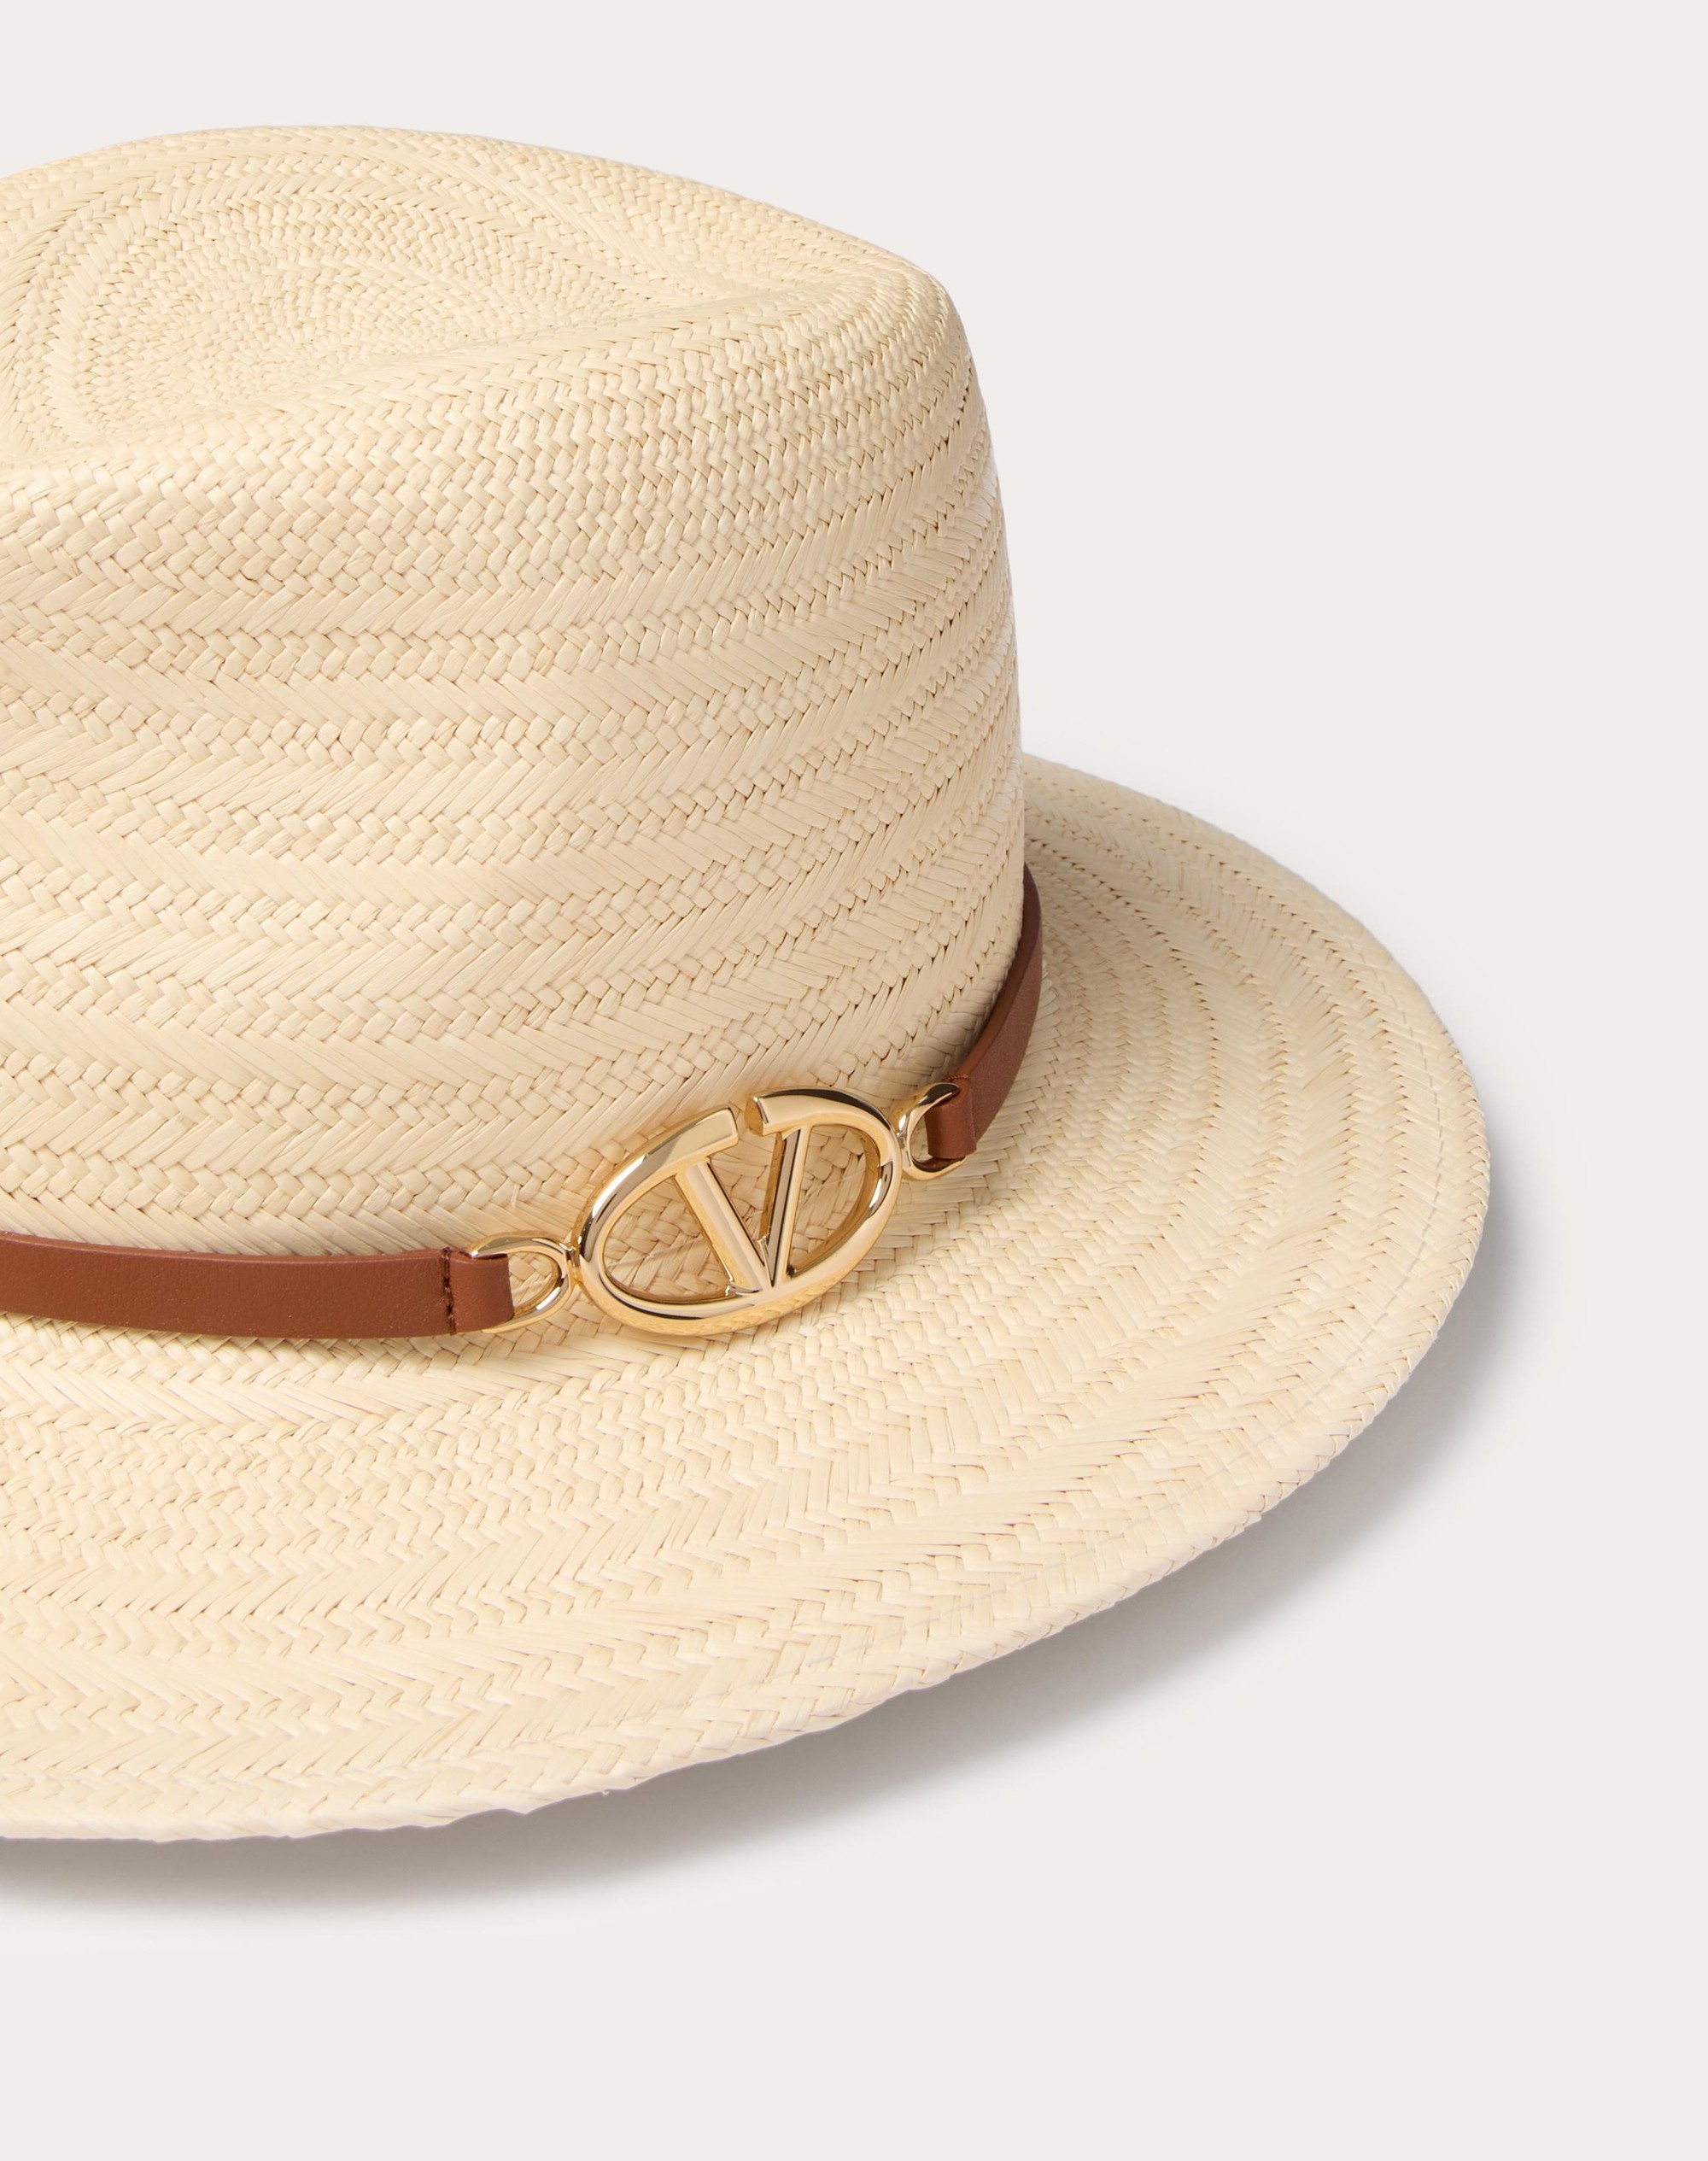 THE BOLD EDITION VLOGO WOVEN PANAMA FEDORA HAT WITH METAL DETAIL - 2